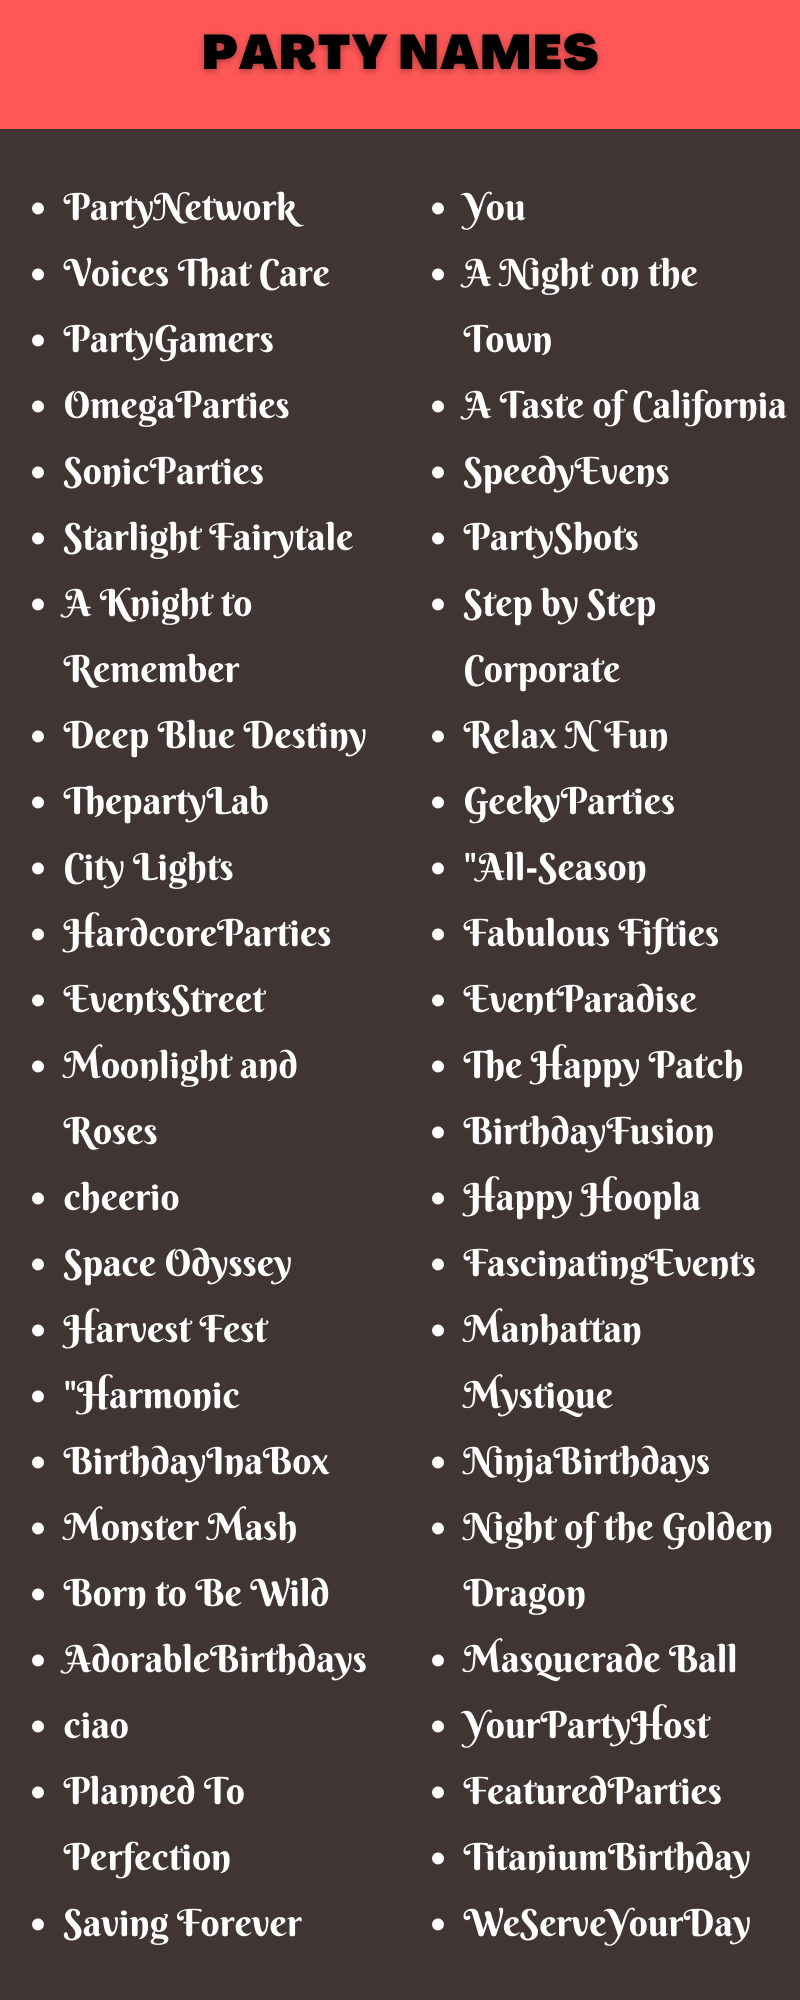 900 Cool Fancy Party Names Ideas and Suggestions